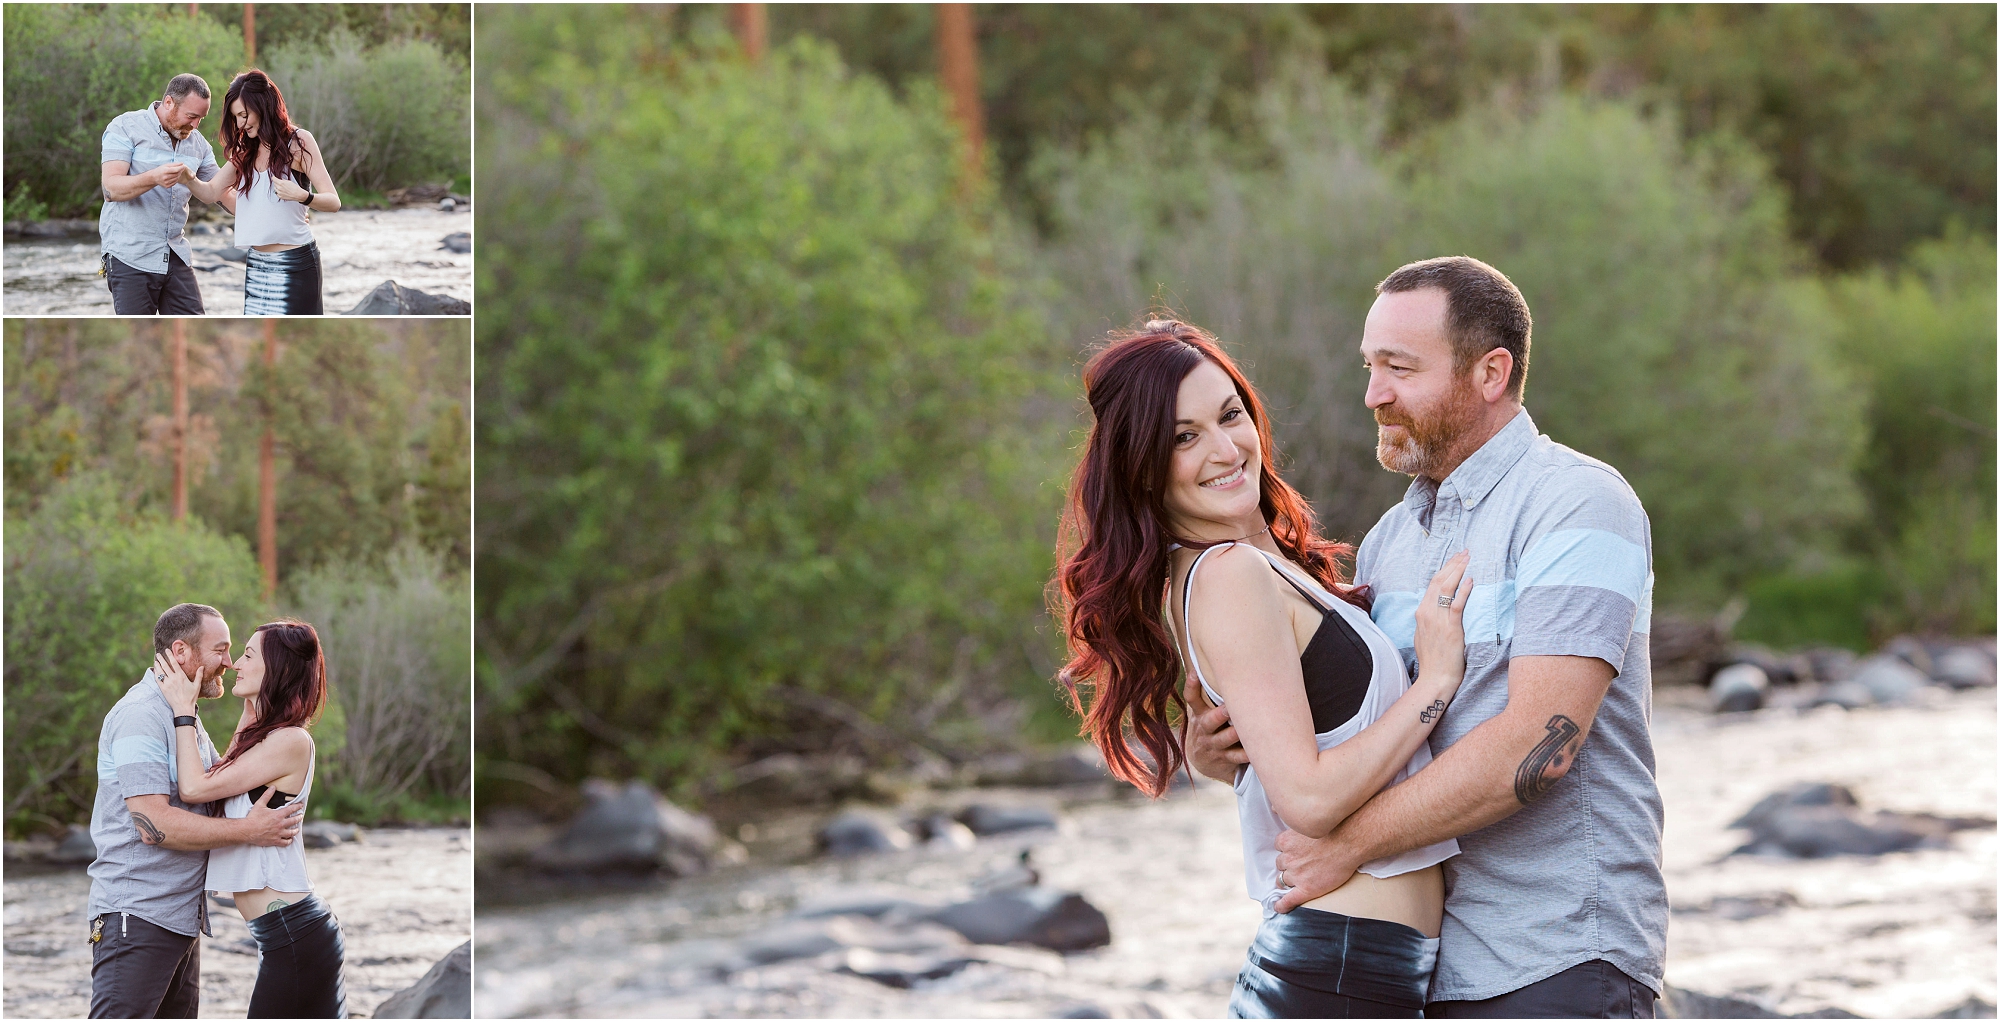 Gorgeous engagement session along the Deschutes River in Bend, OR. | Erica Swantek Photography